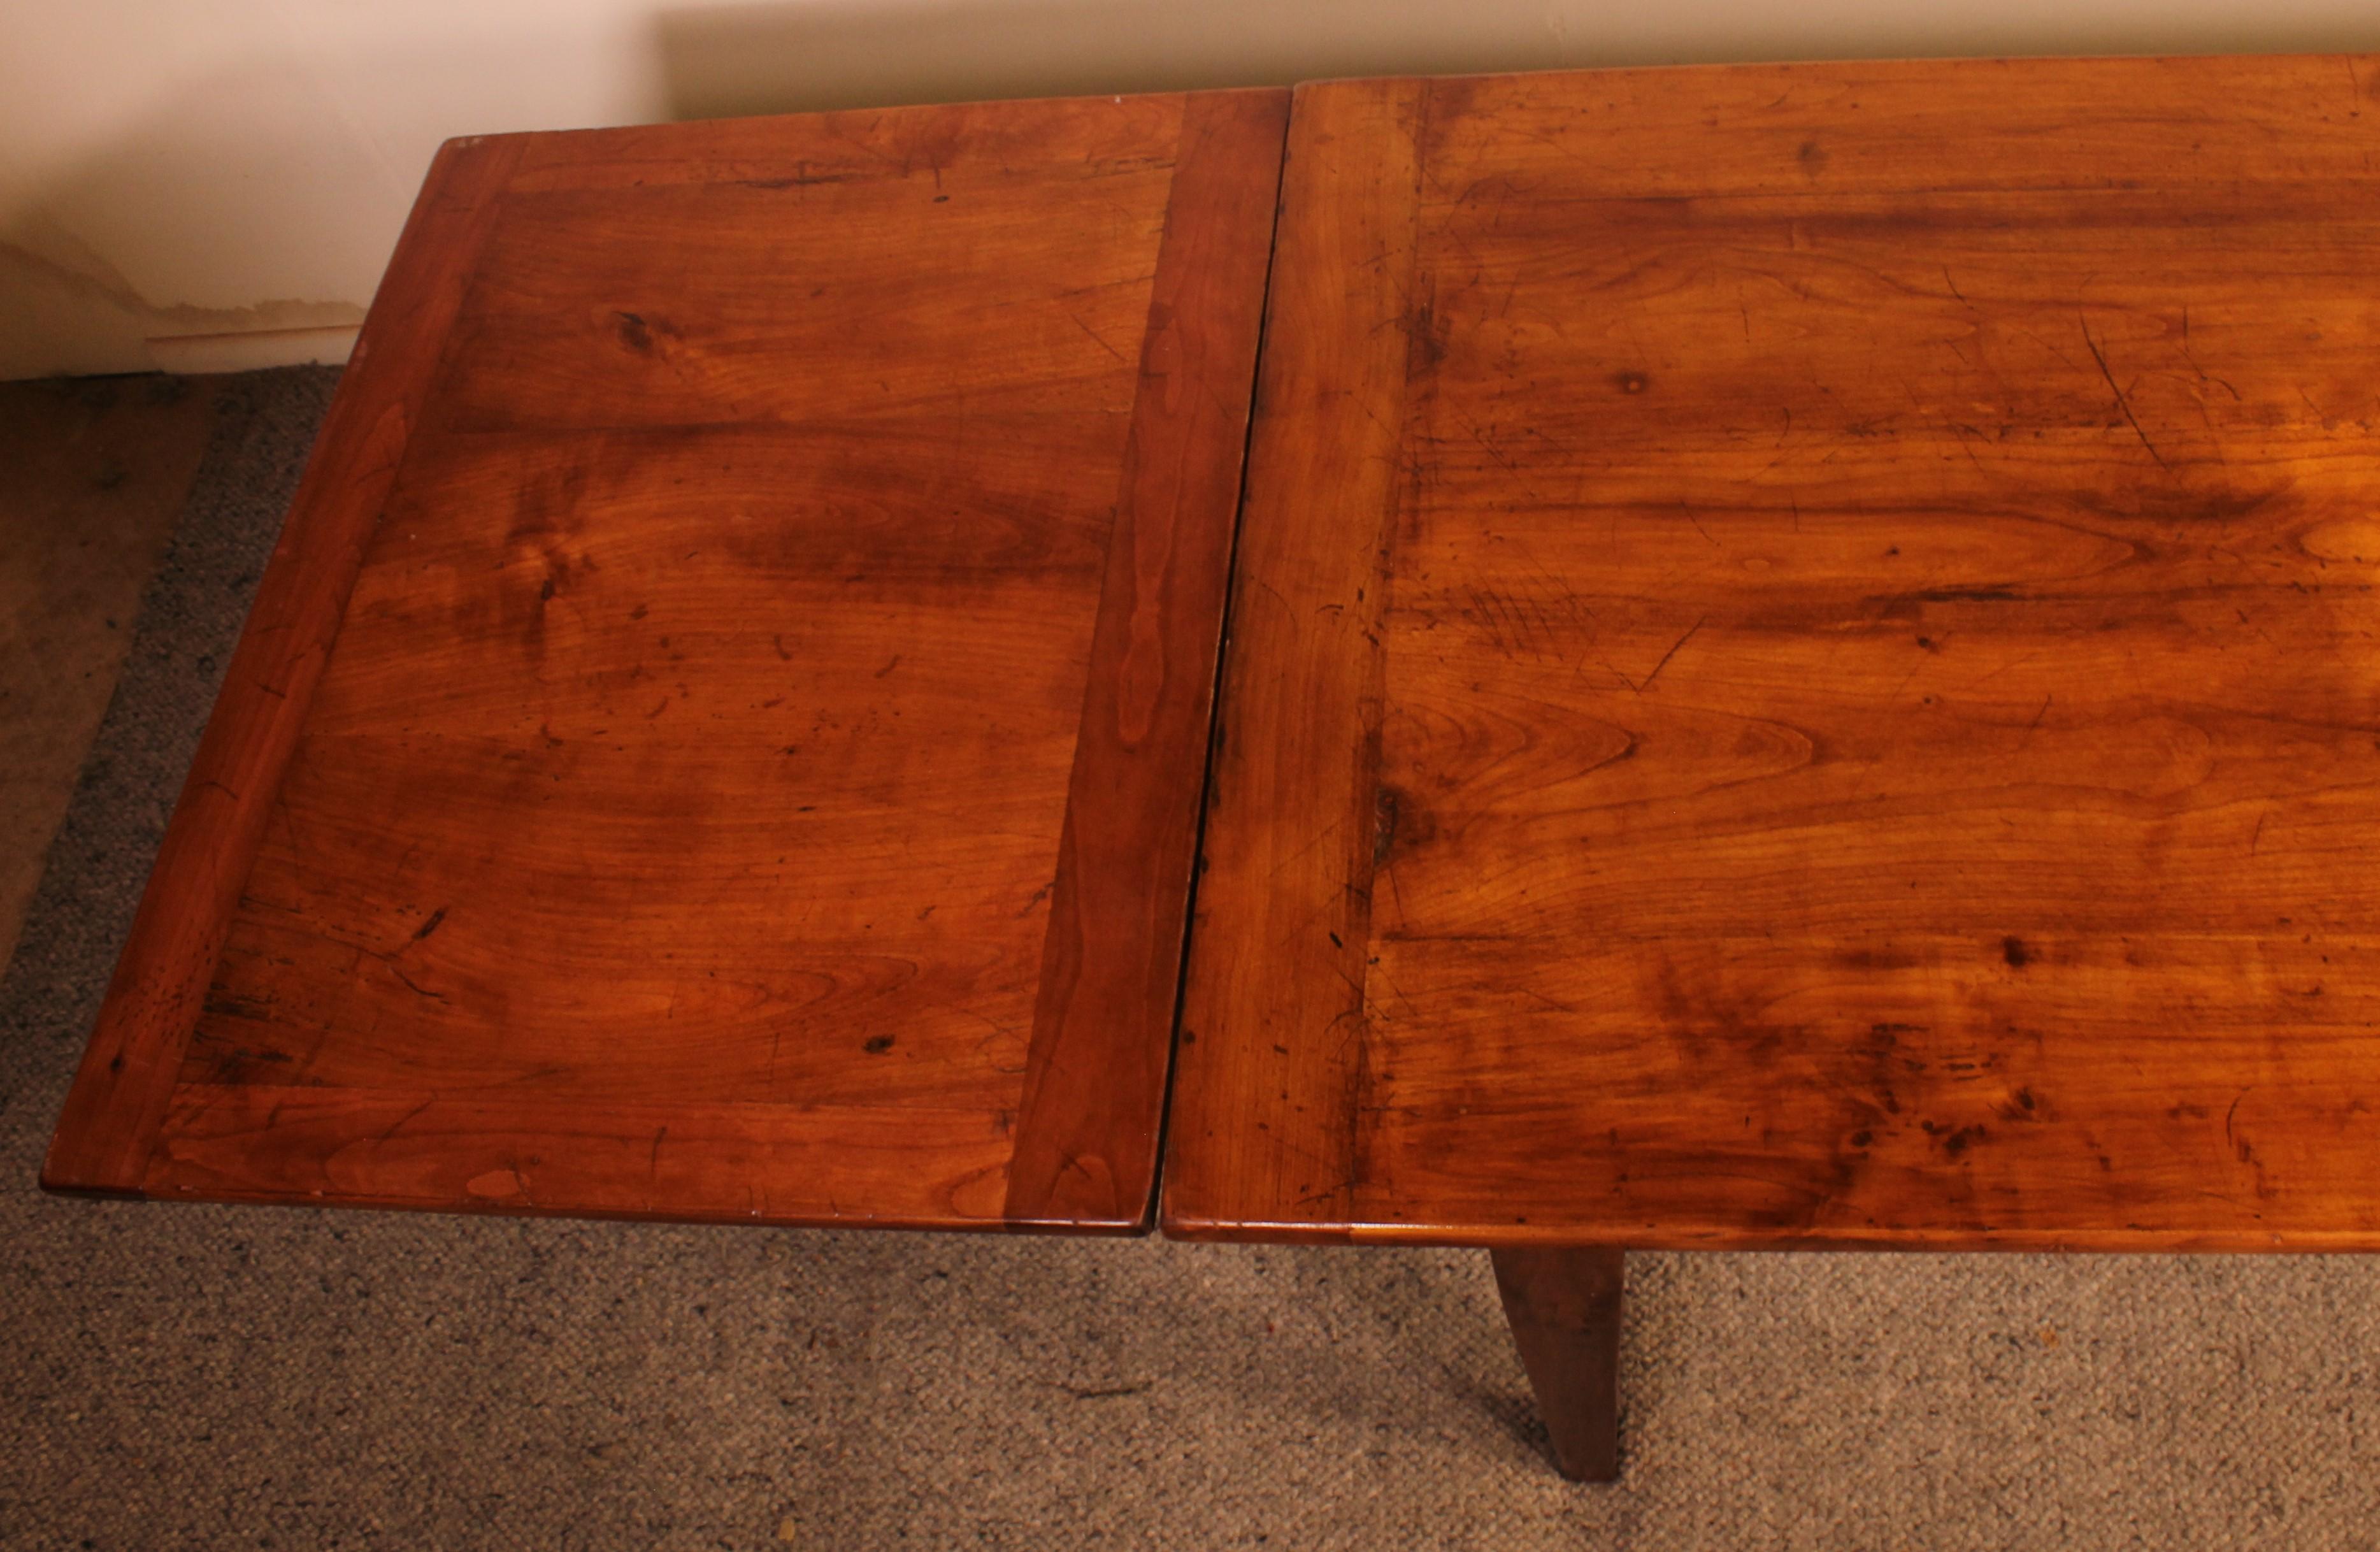 Small Extendable Table in Cherry Wood from the 19th Century For Sale 1